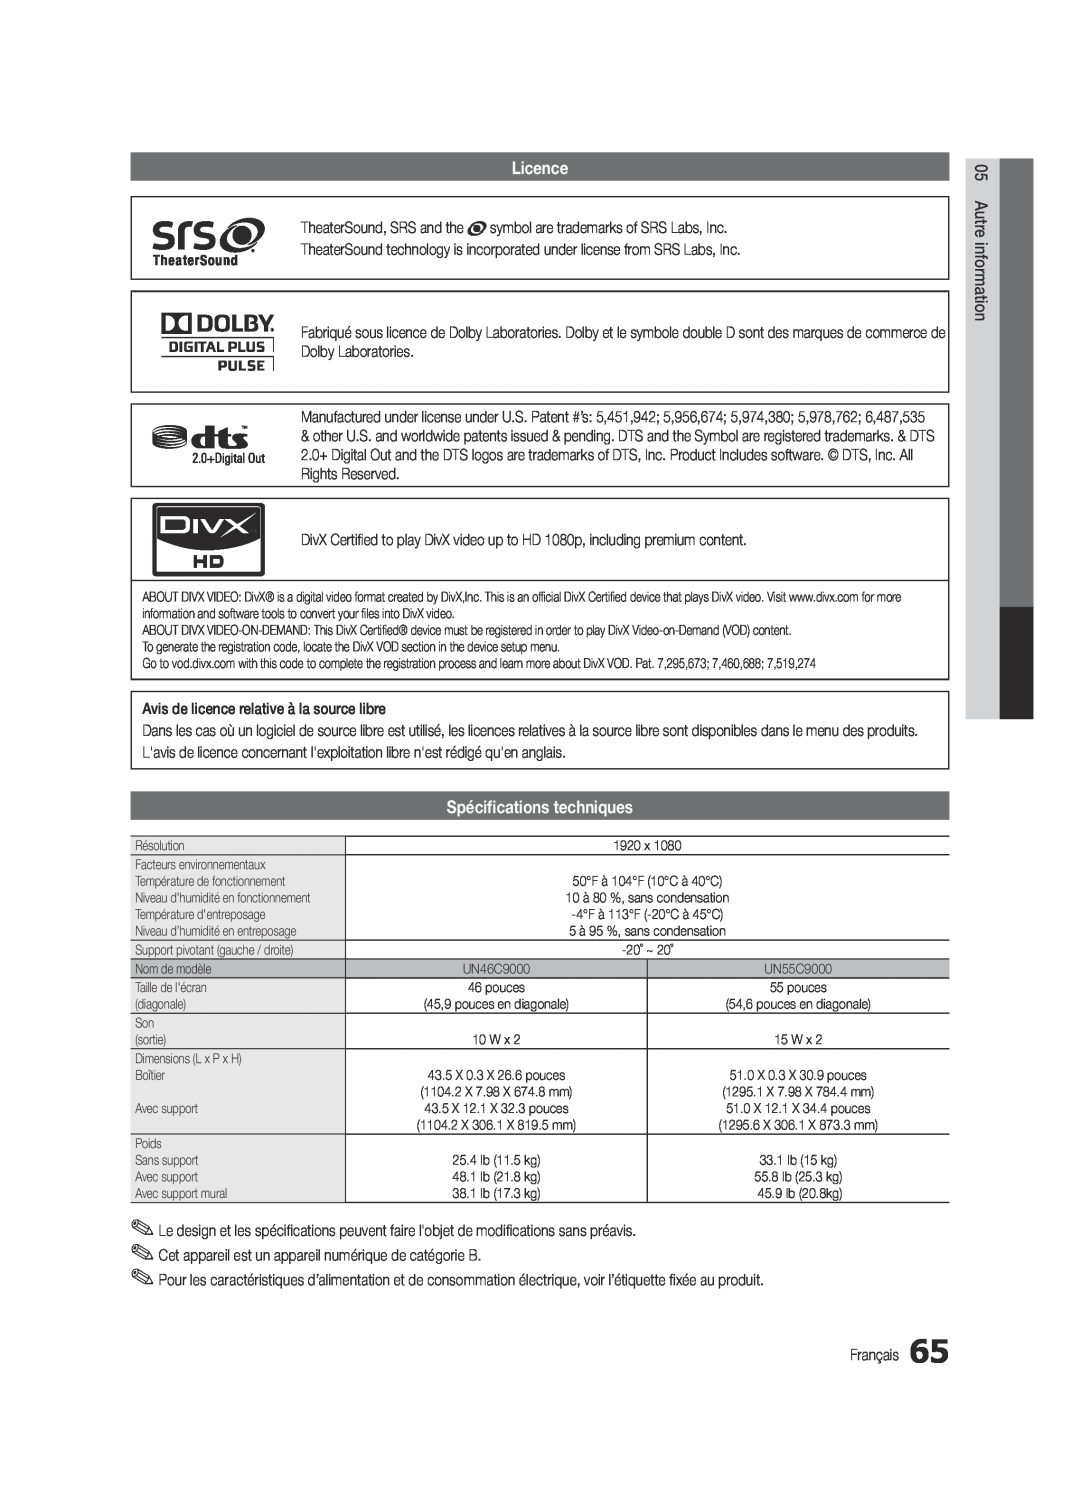 Samsung Series C9, BN68-03088A-01 user manual Licence, Spécifications techniques 